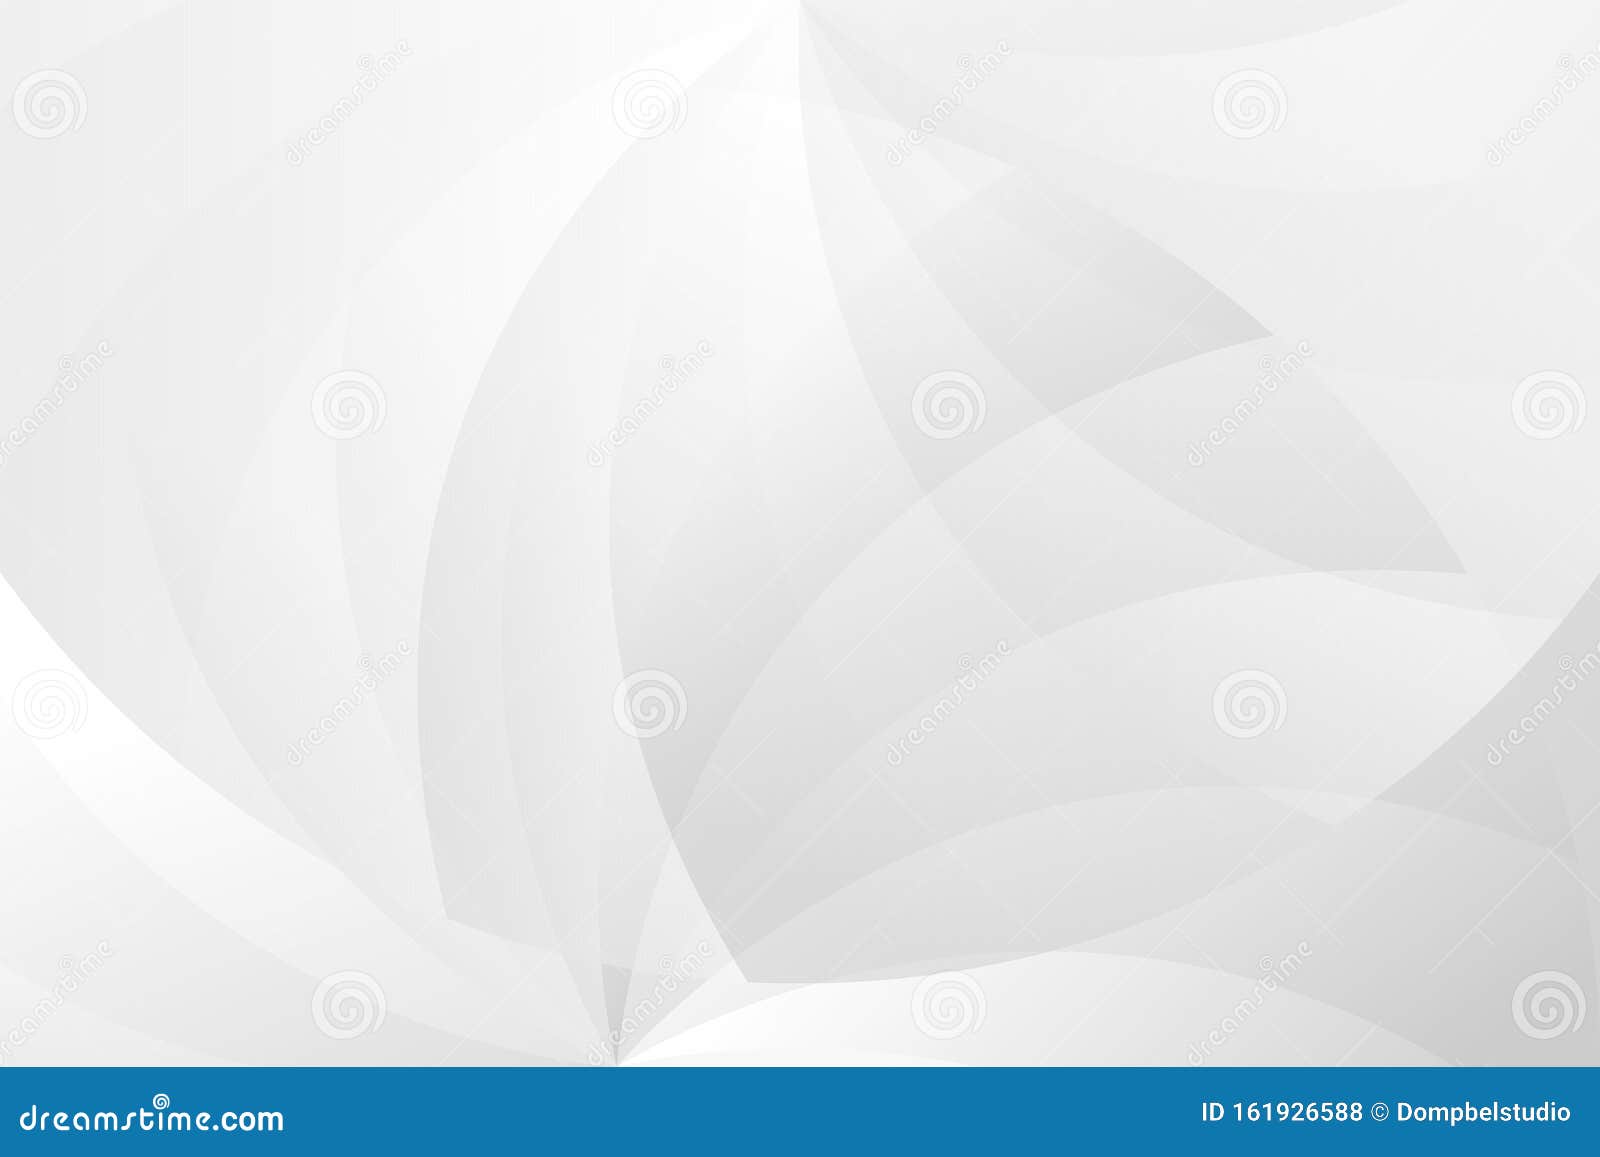 Dompbackground: Abstract Curvy Cylinder White Grey Background Stock Vector  - Illustration of hill, four: 161926588